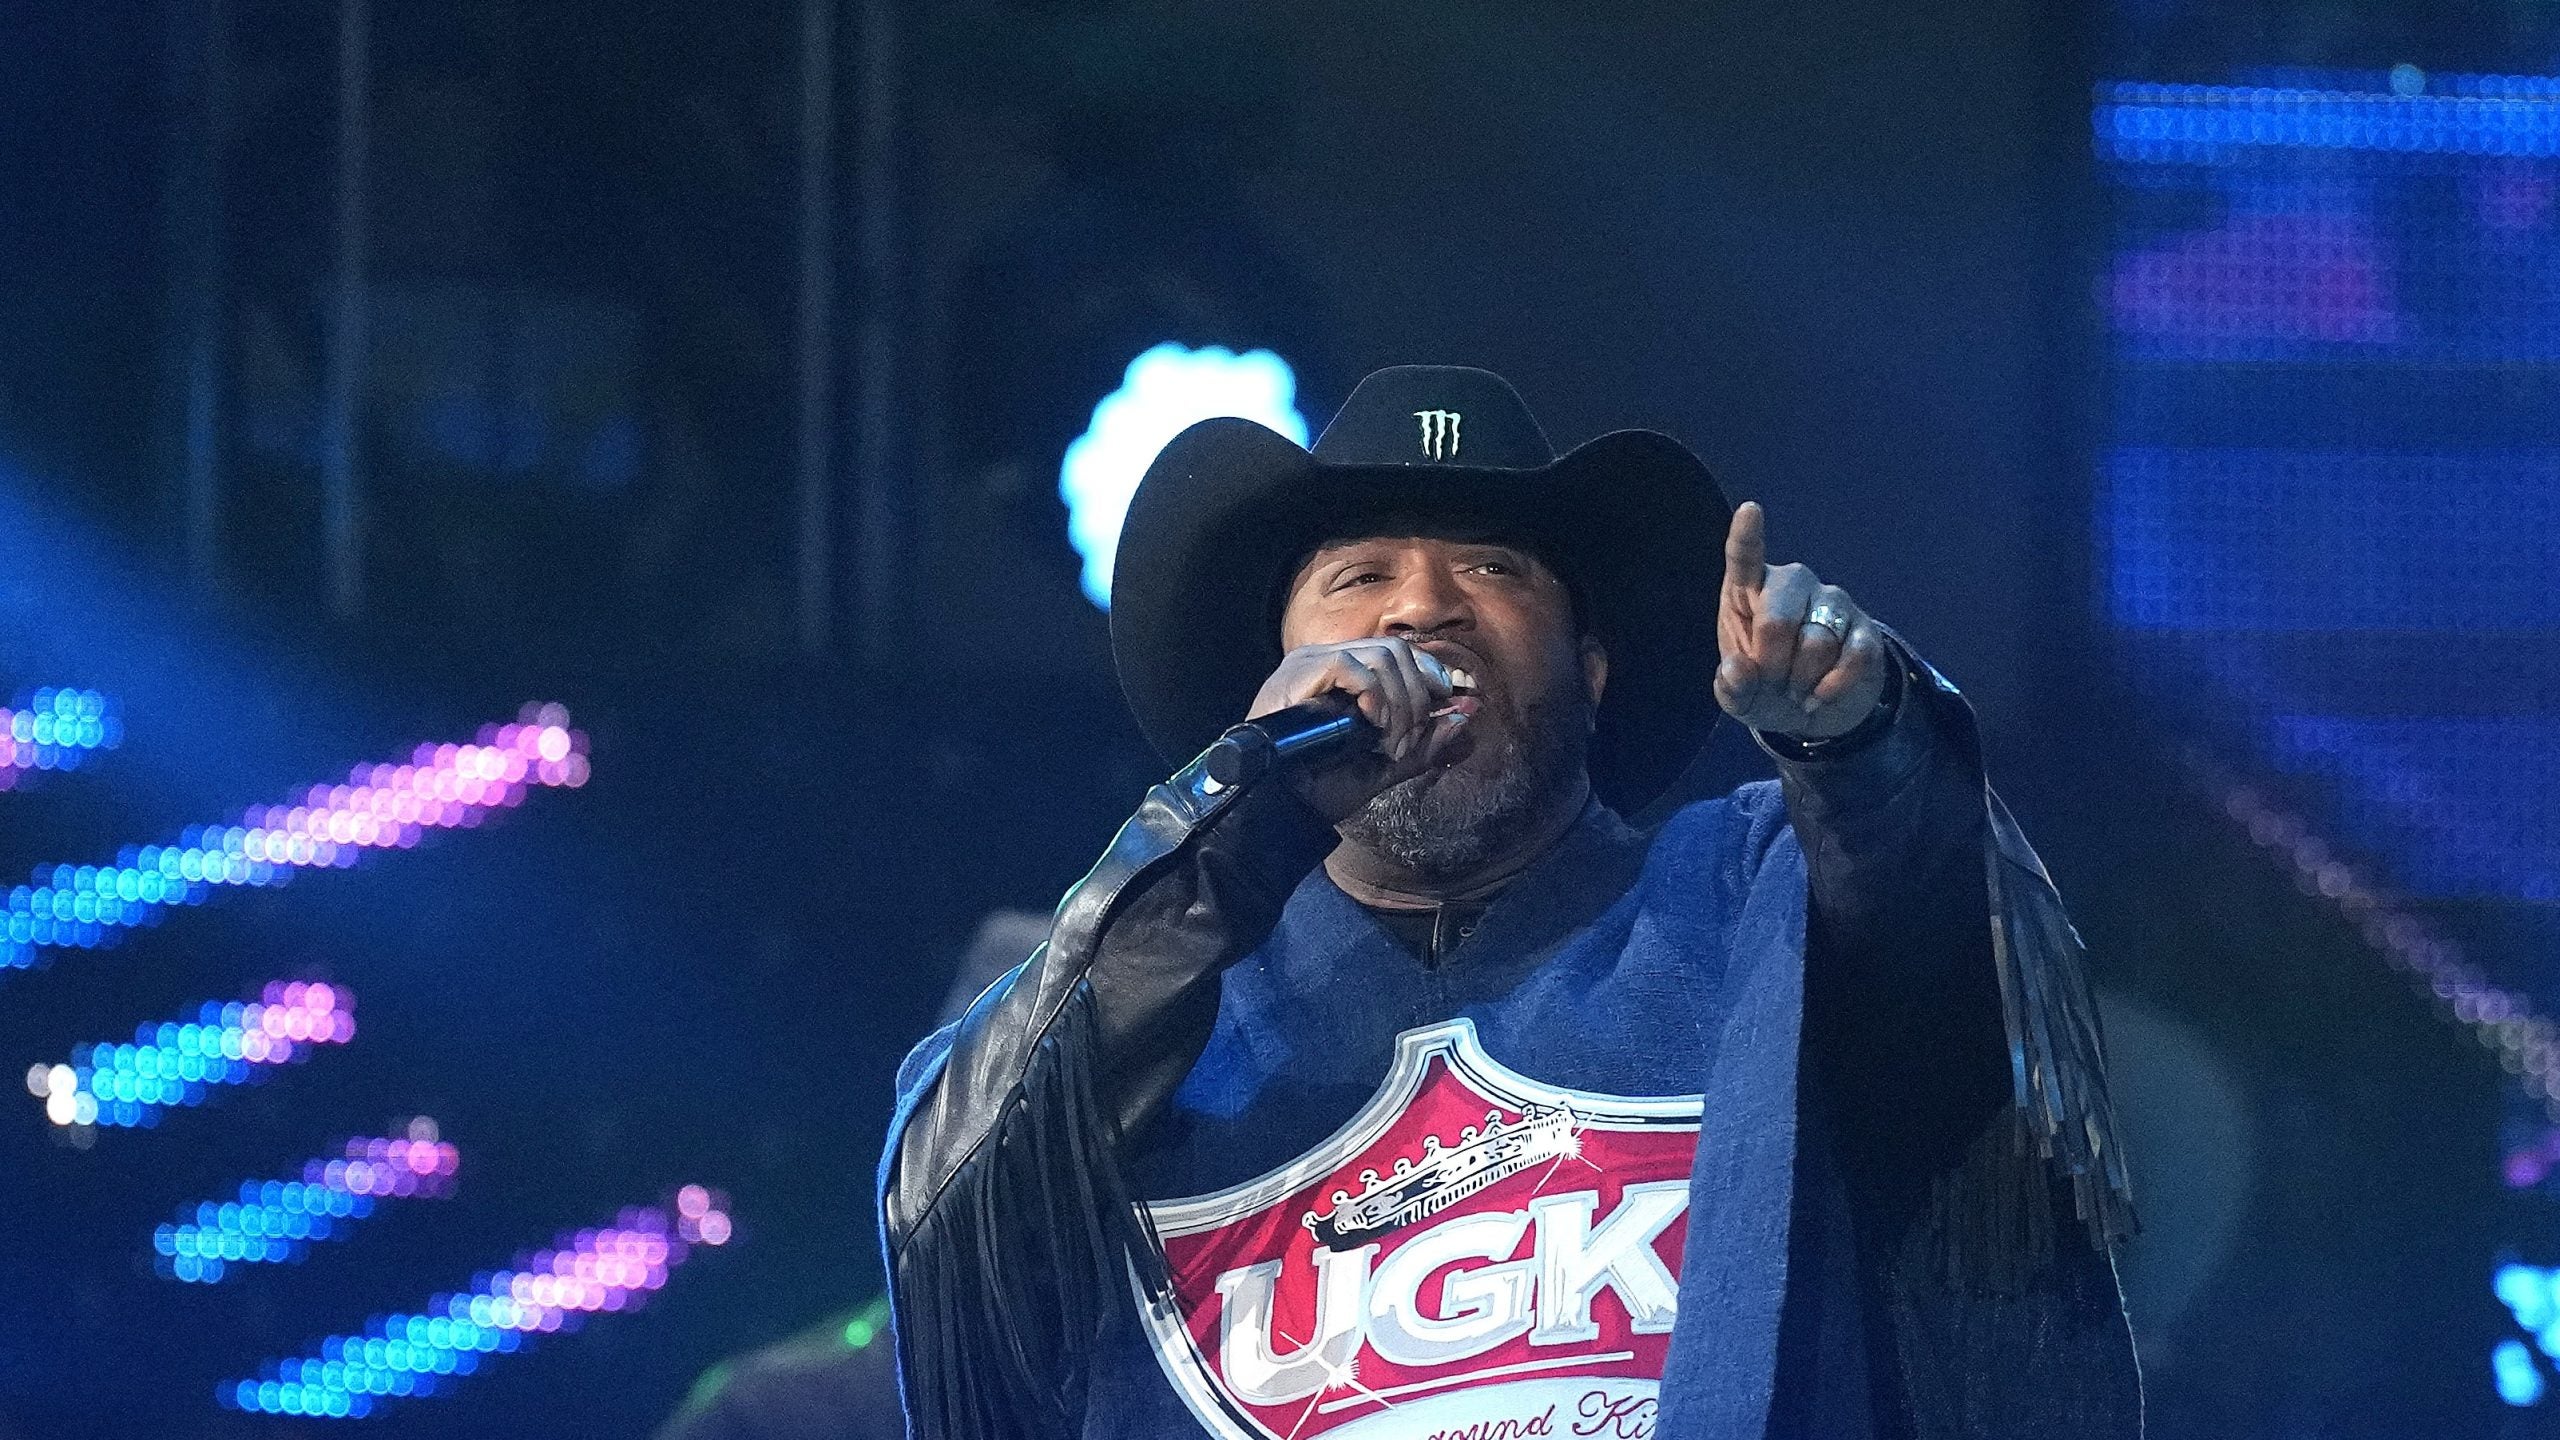 50 Cent, Bun B, Jelly Roll And More Announced At Houston Livestock Show And Rodeo